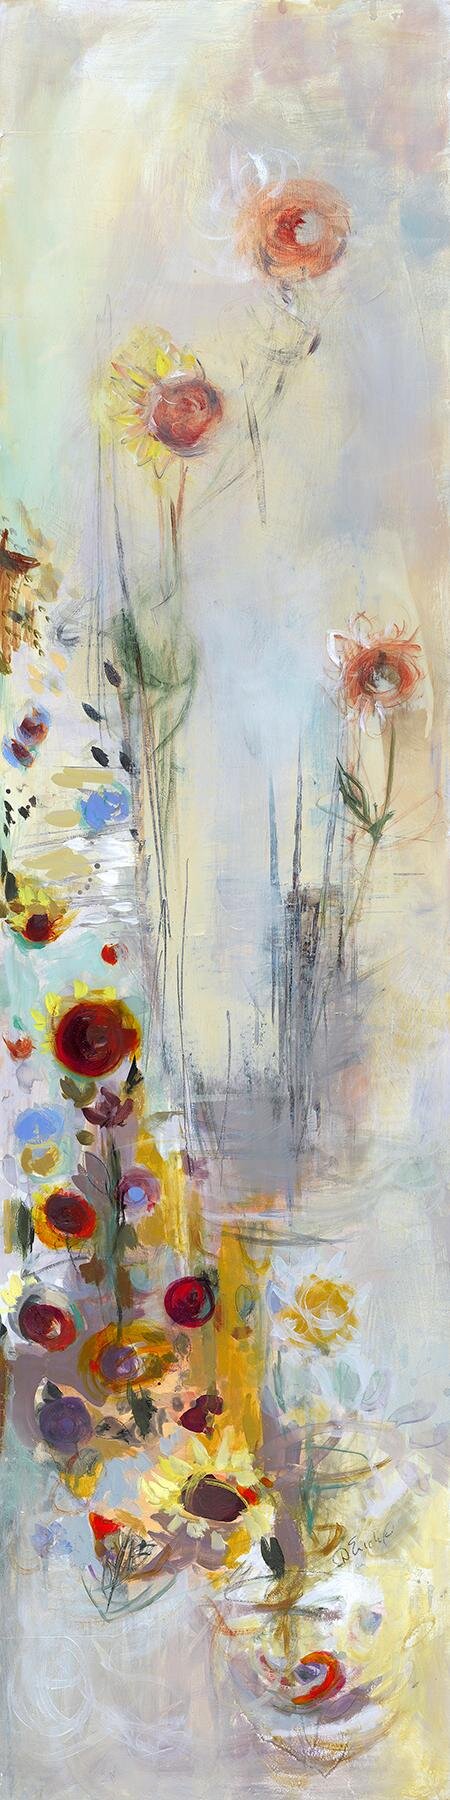   Summer Solstice  Oil on wood 48x12 inches SOLD 